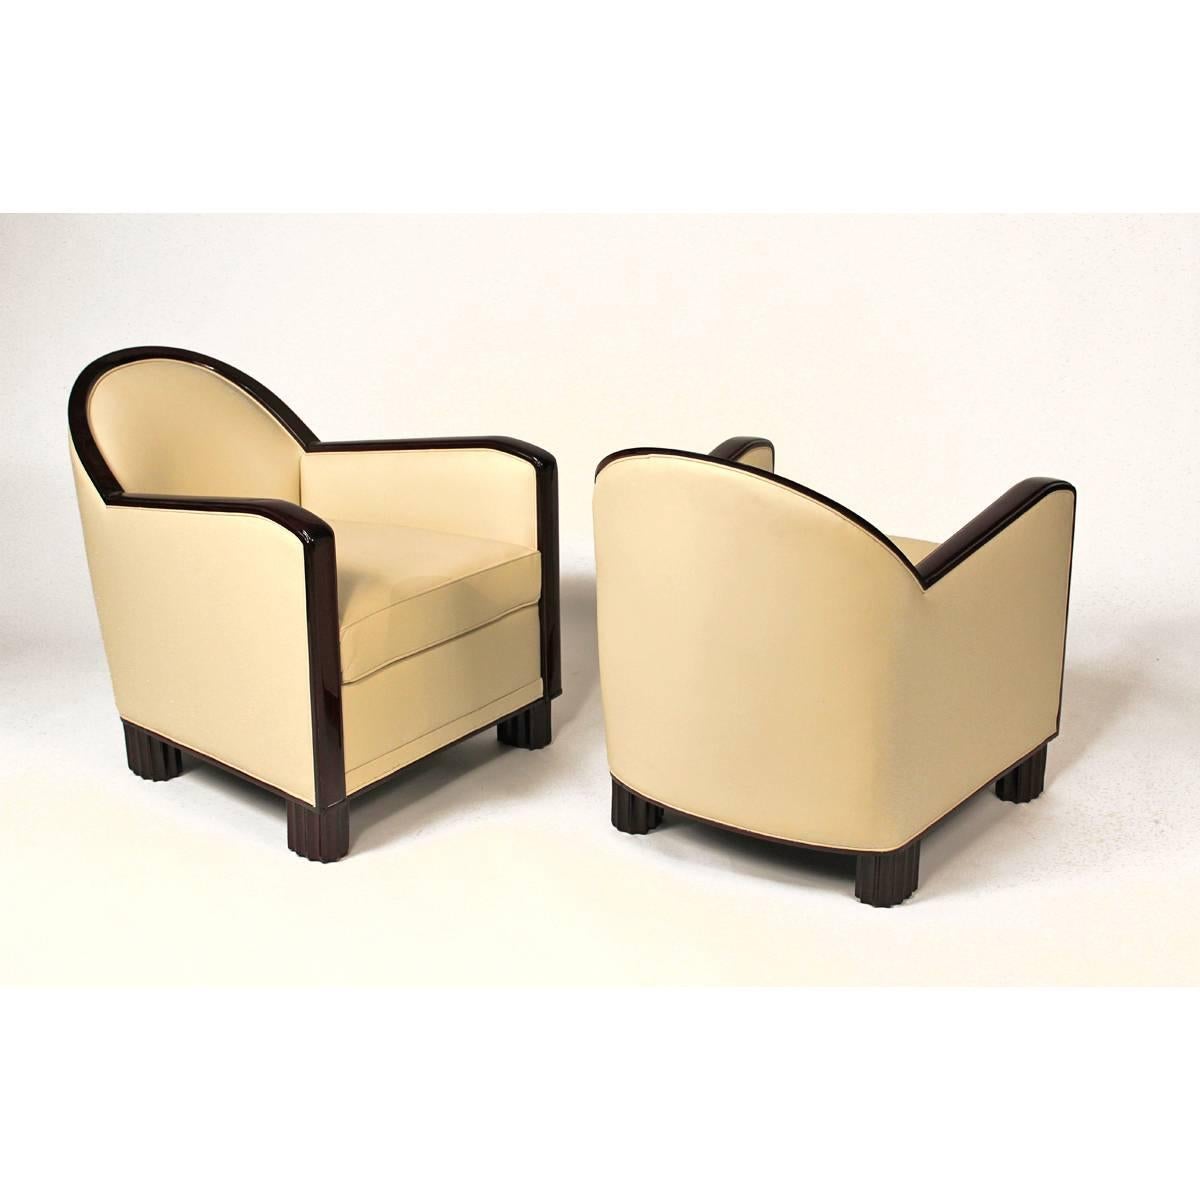 Pair of rosewood Art Deco club chairs covered in white-cream leather designed by French Atelier D.I.M.
(Joubert et Petit).
Made in France
circa 1930
Signature: DIM Stamped  

DIM (1919-1953)
 The prestigious French design firm Décoration